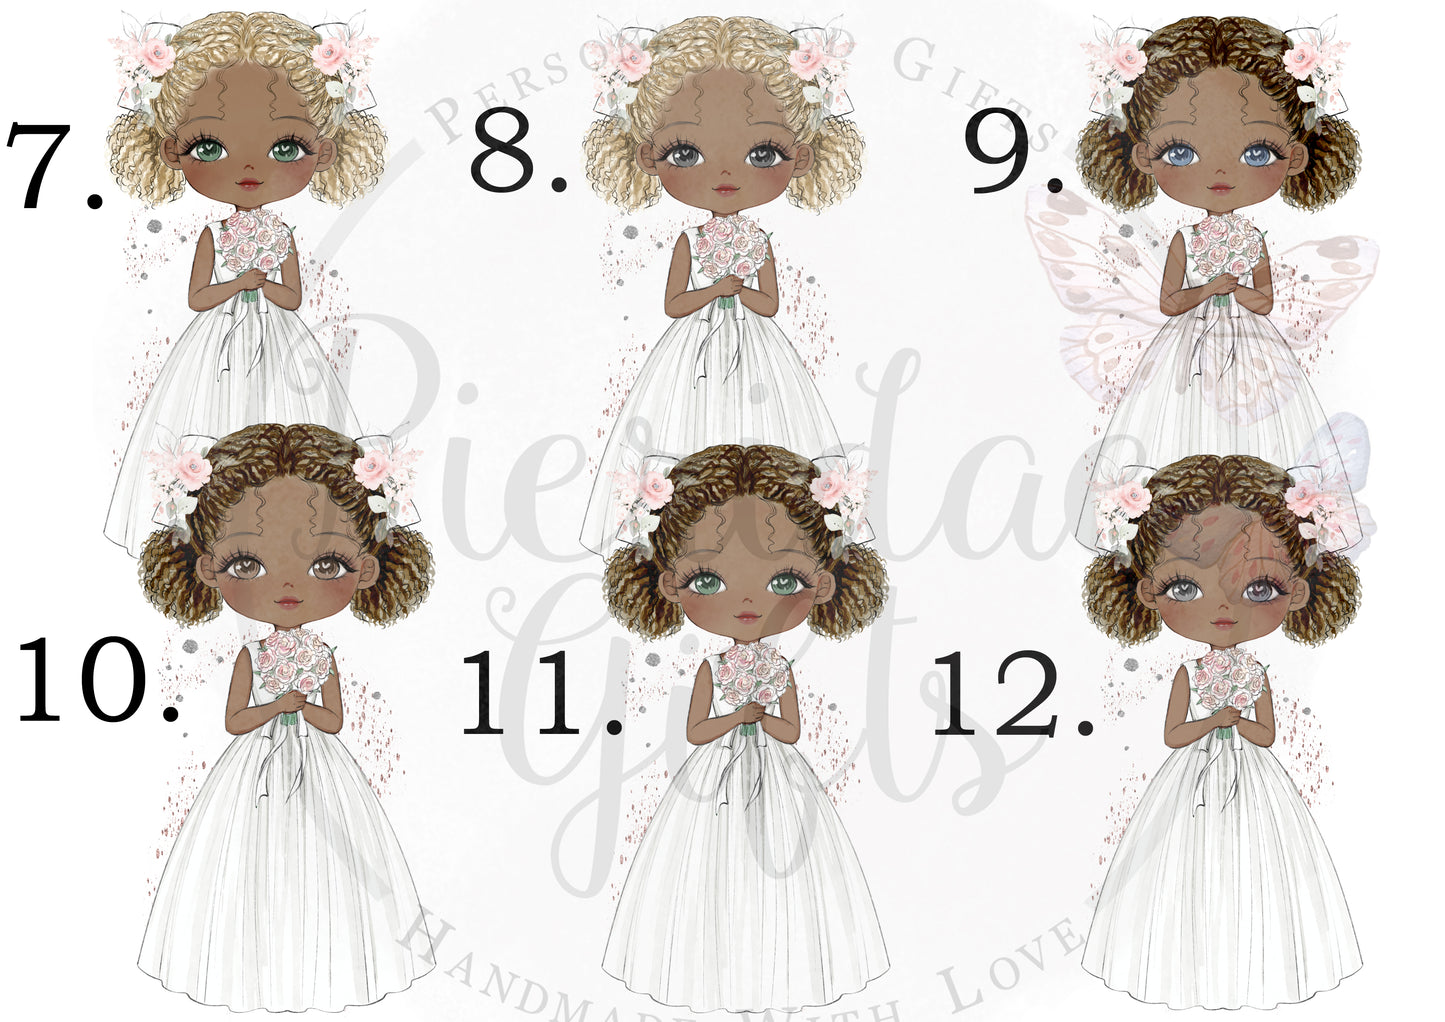 Personalised Flower Girl A5 Note Book